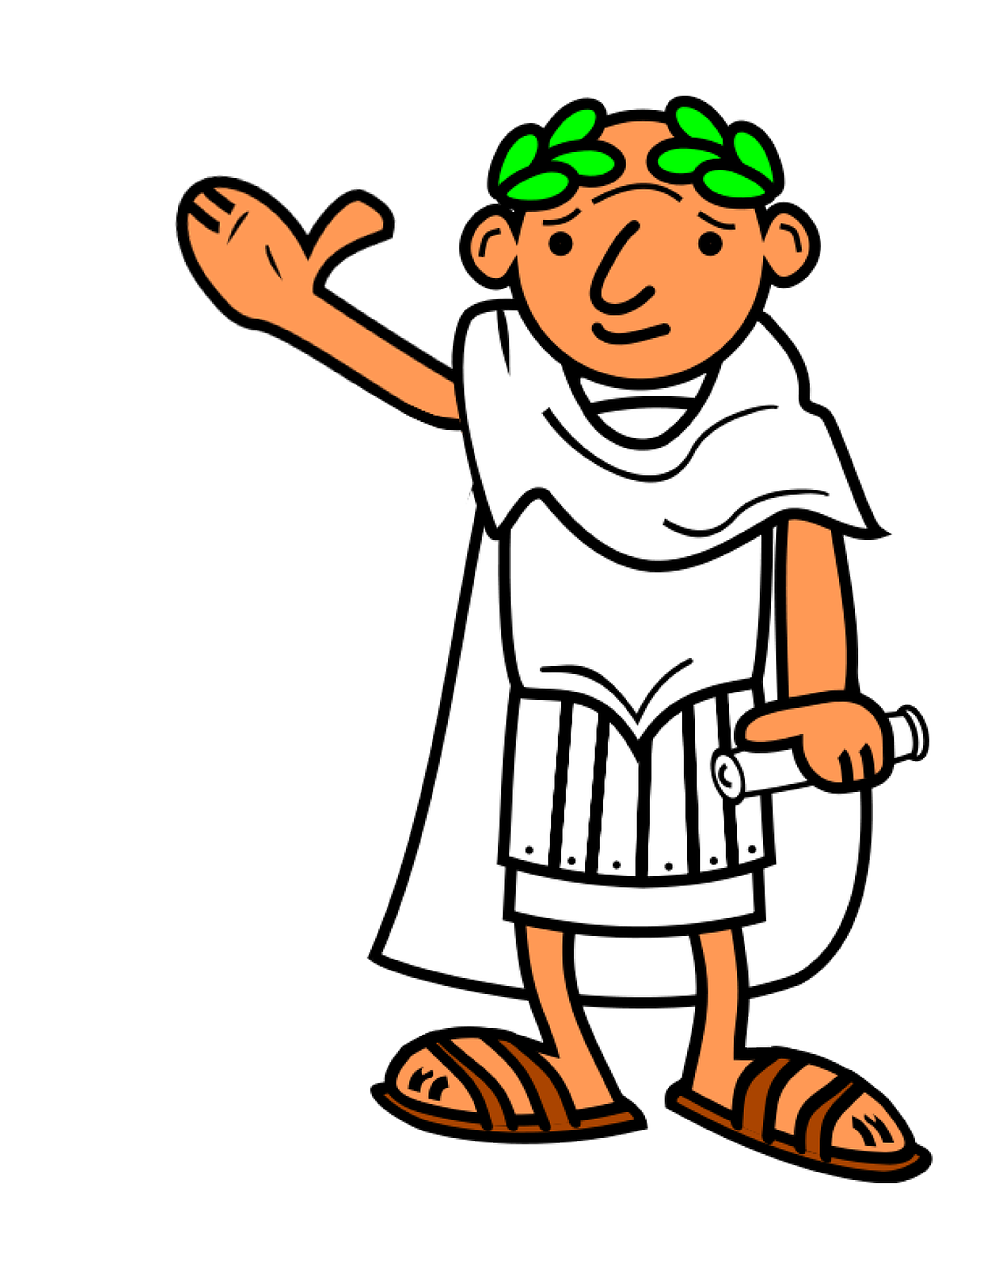 a cartoon of a man holding a tennis racquet, inspired by Pogus Caesar, figuration libre, wearing a toga and sandals, with index finger, boys, roman city